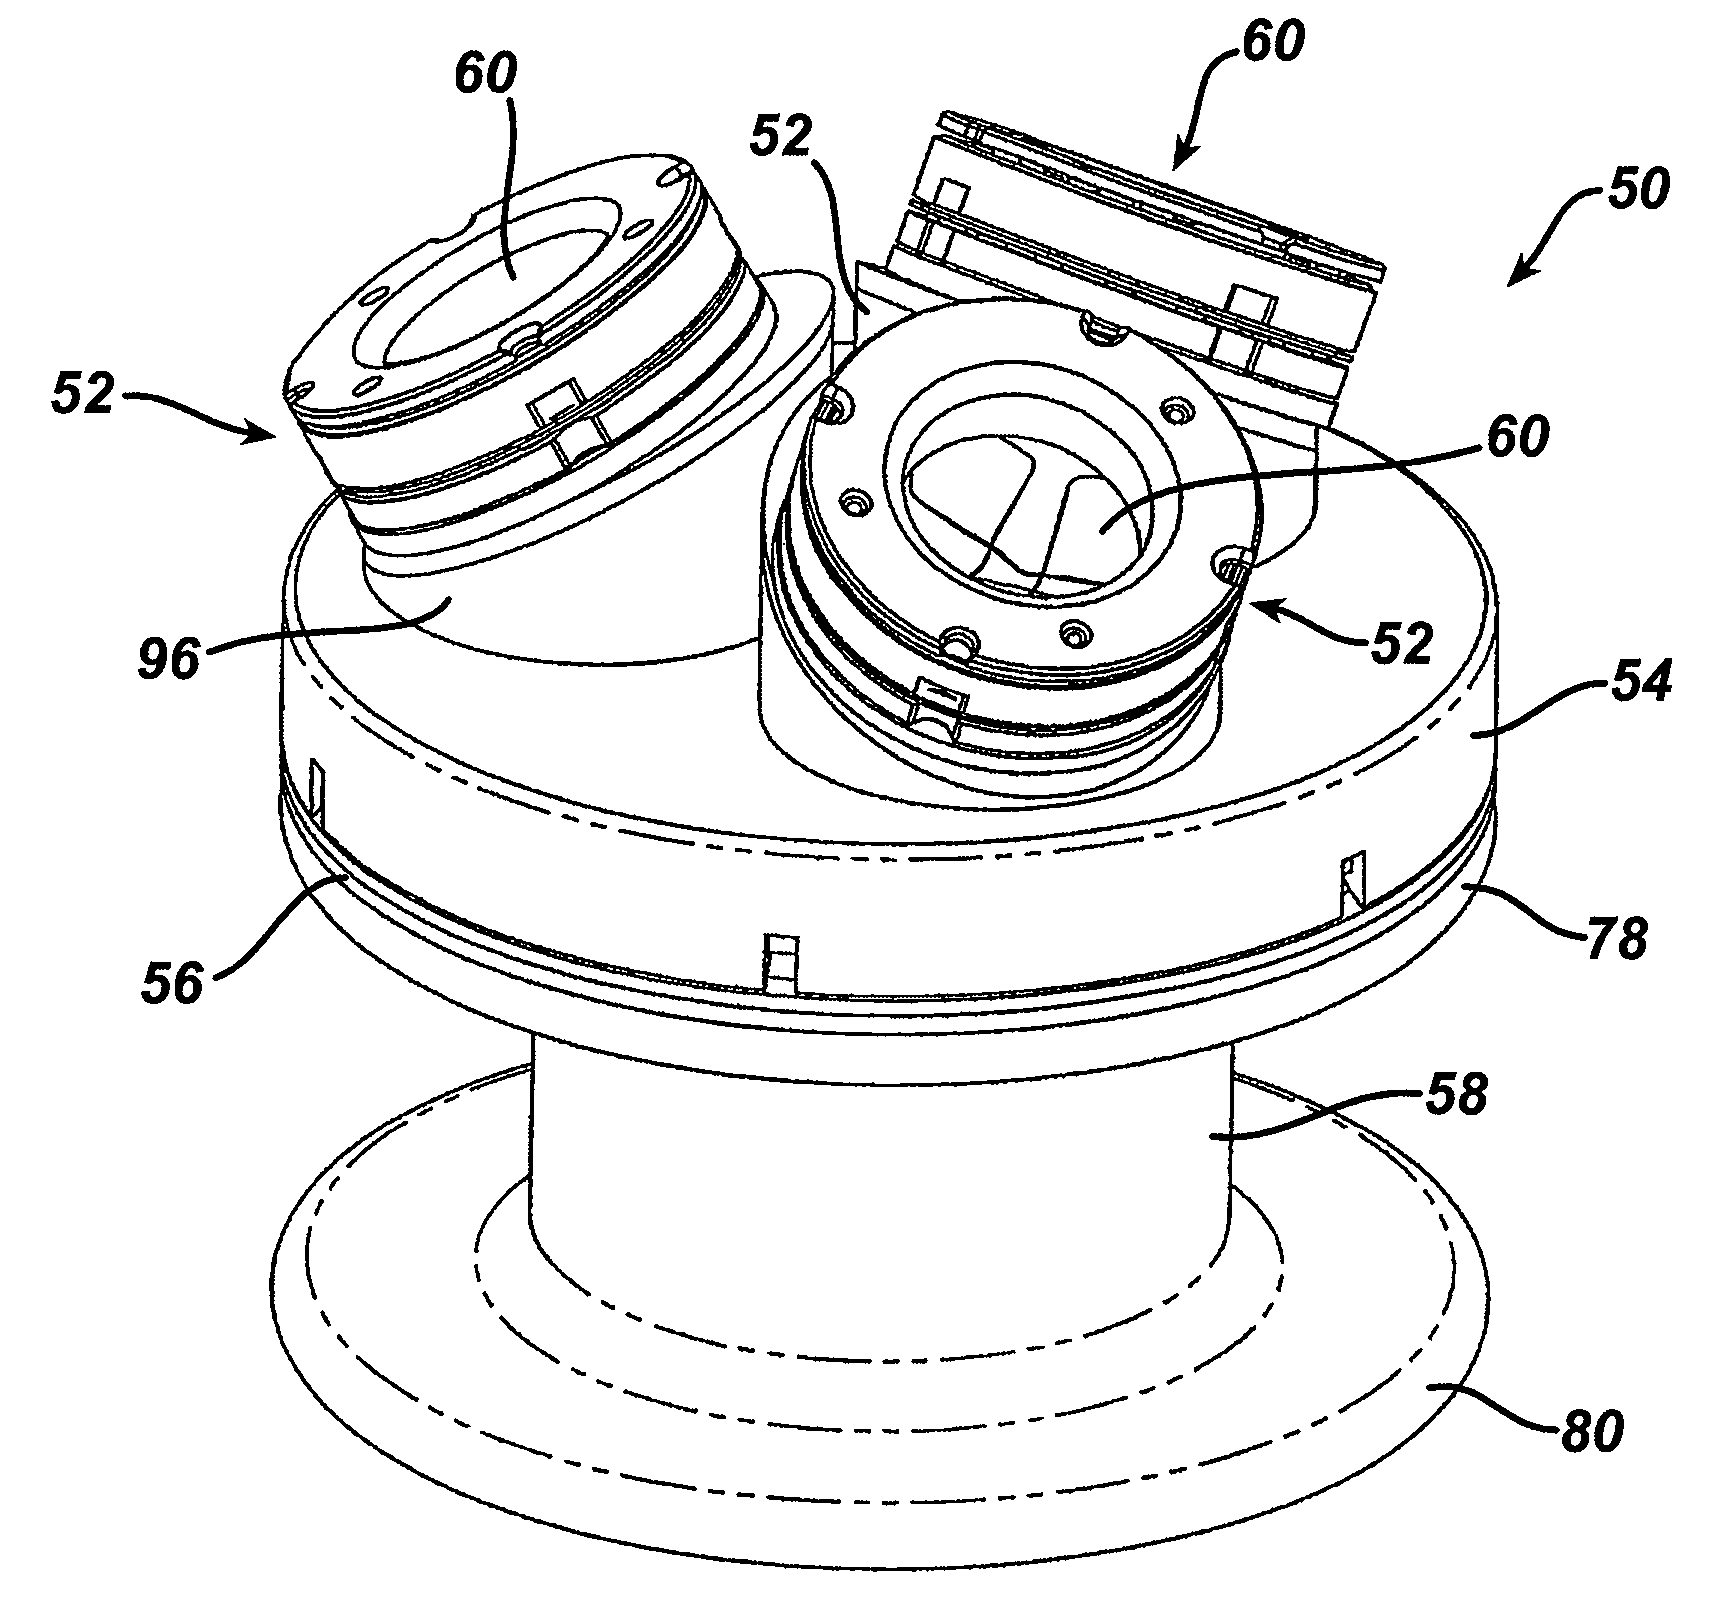 Surgical Access Device